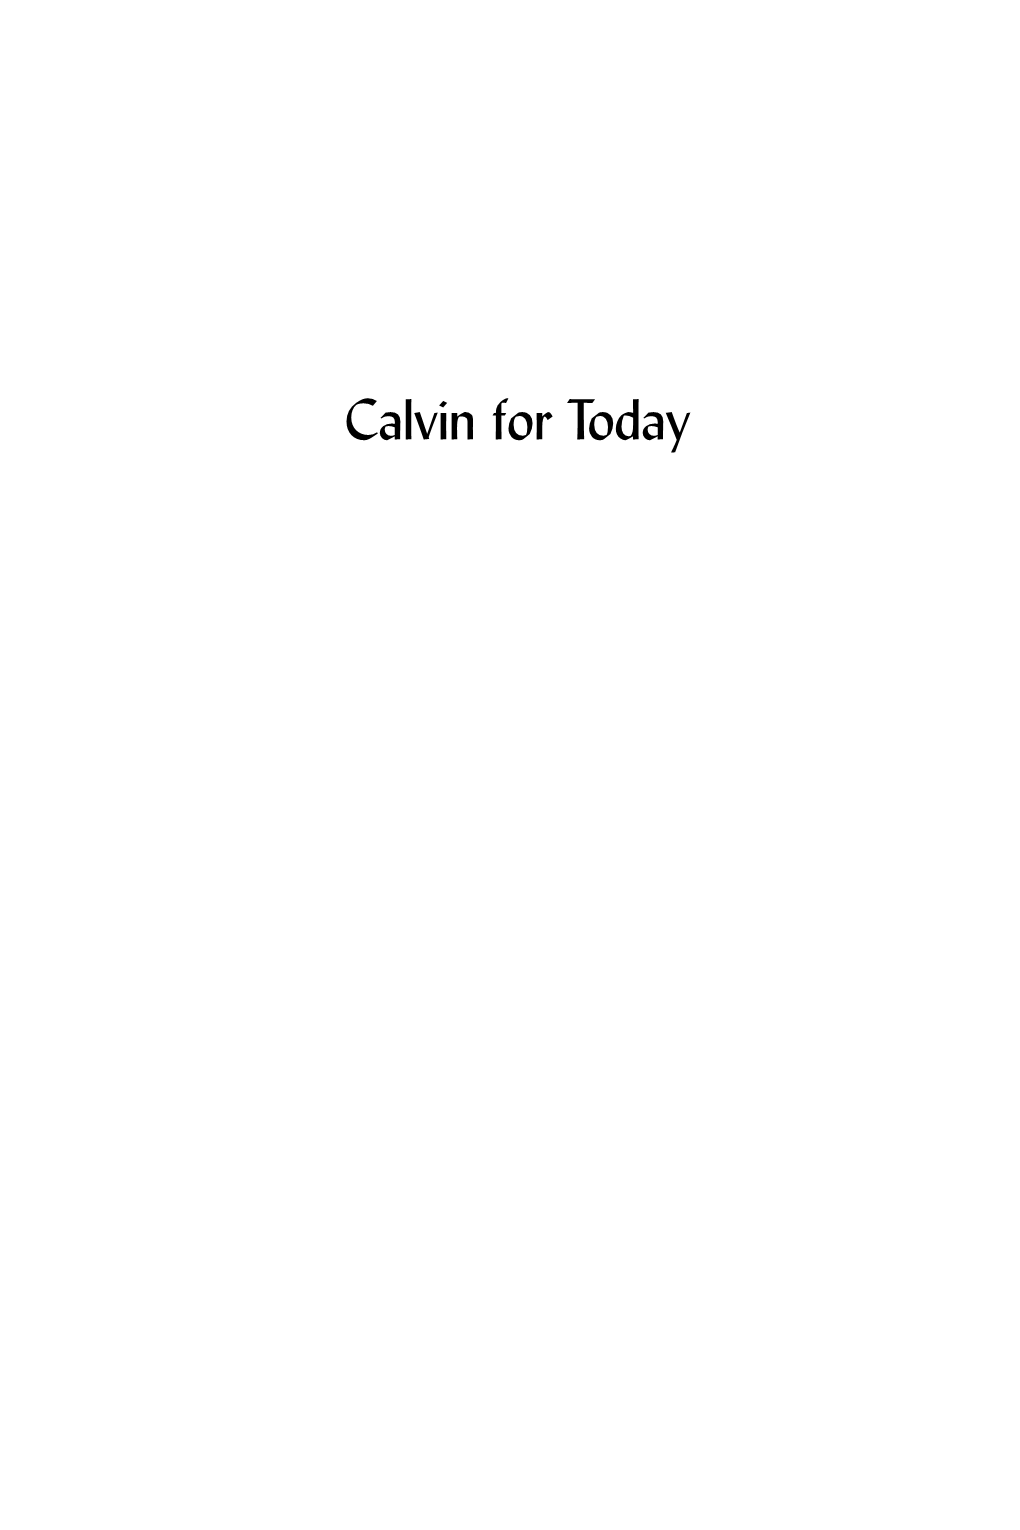 Calvin for Today